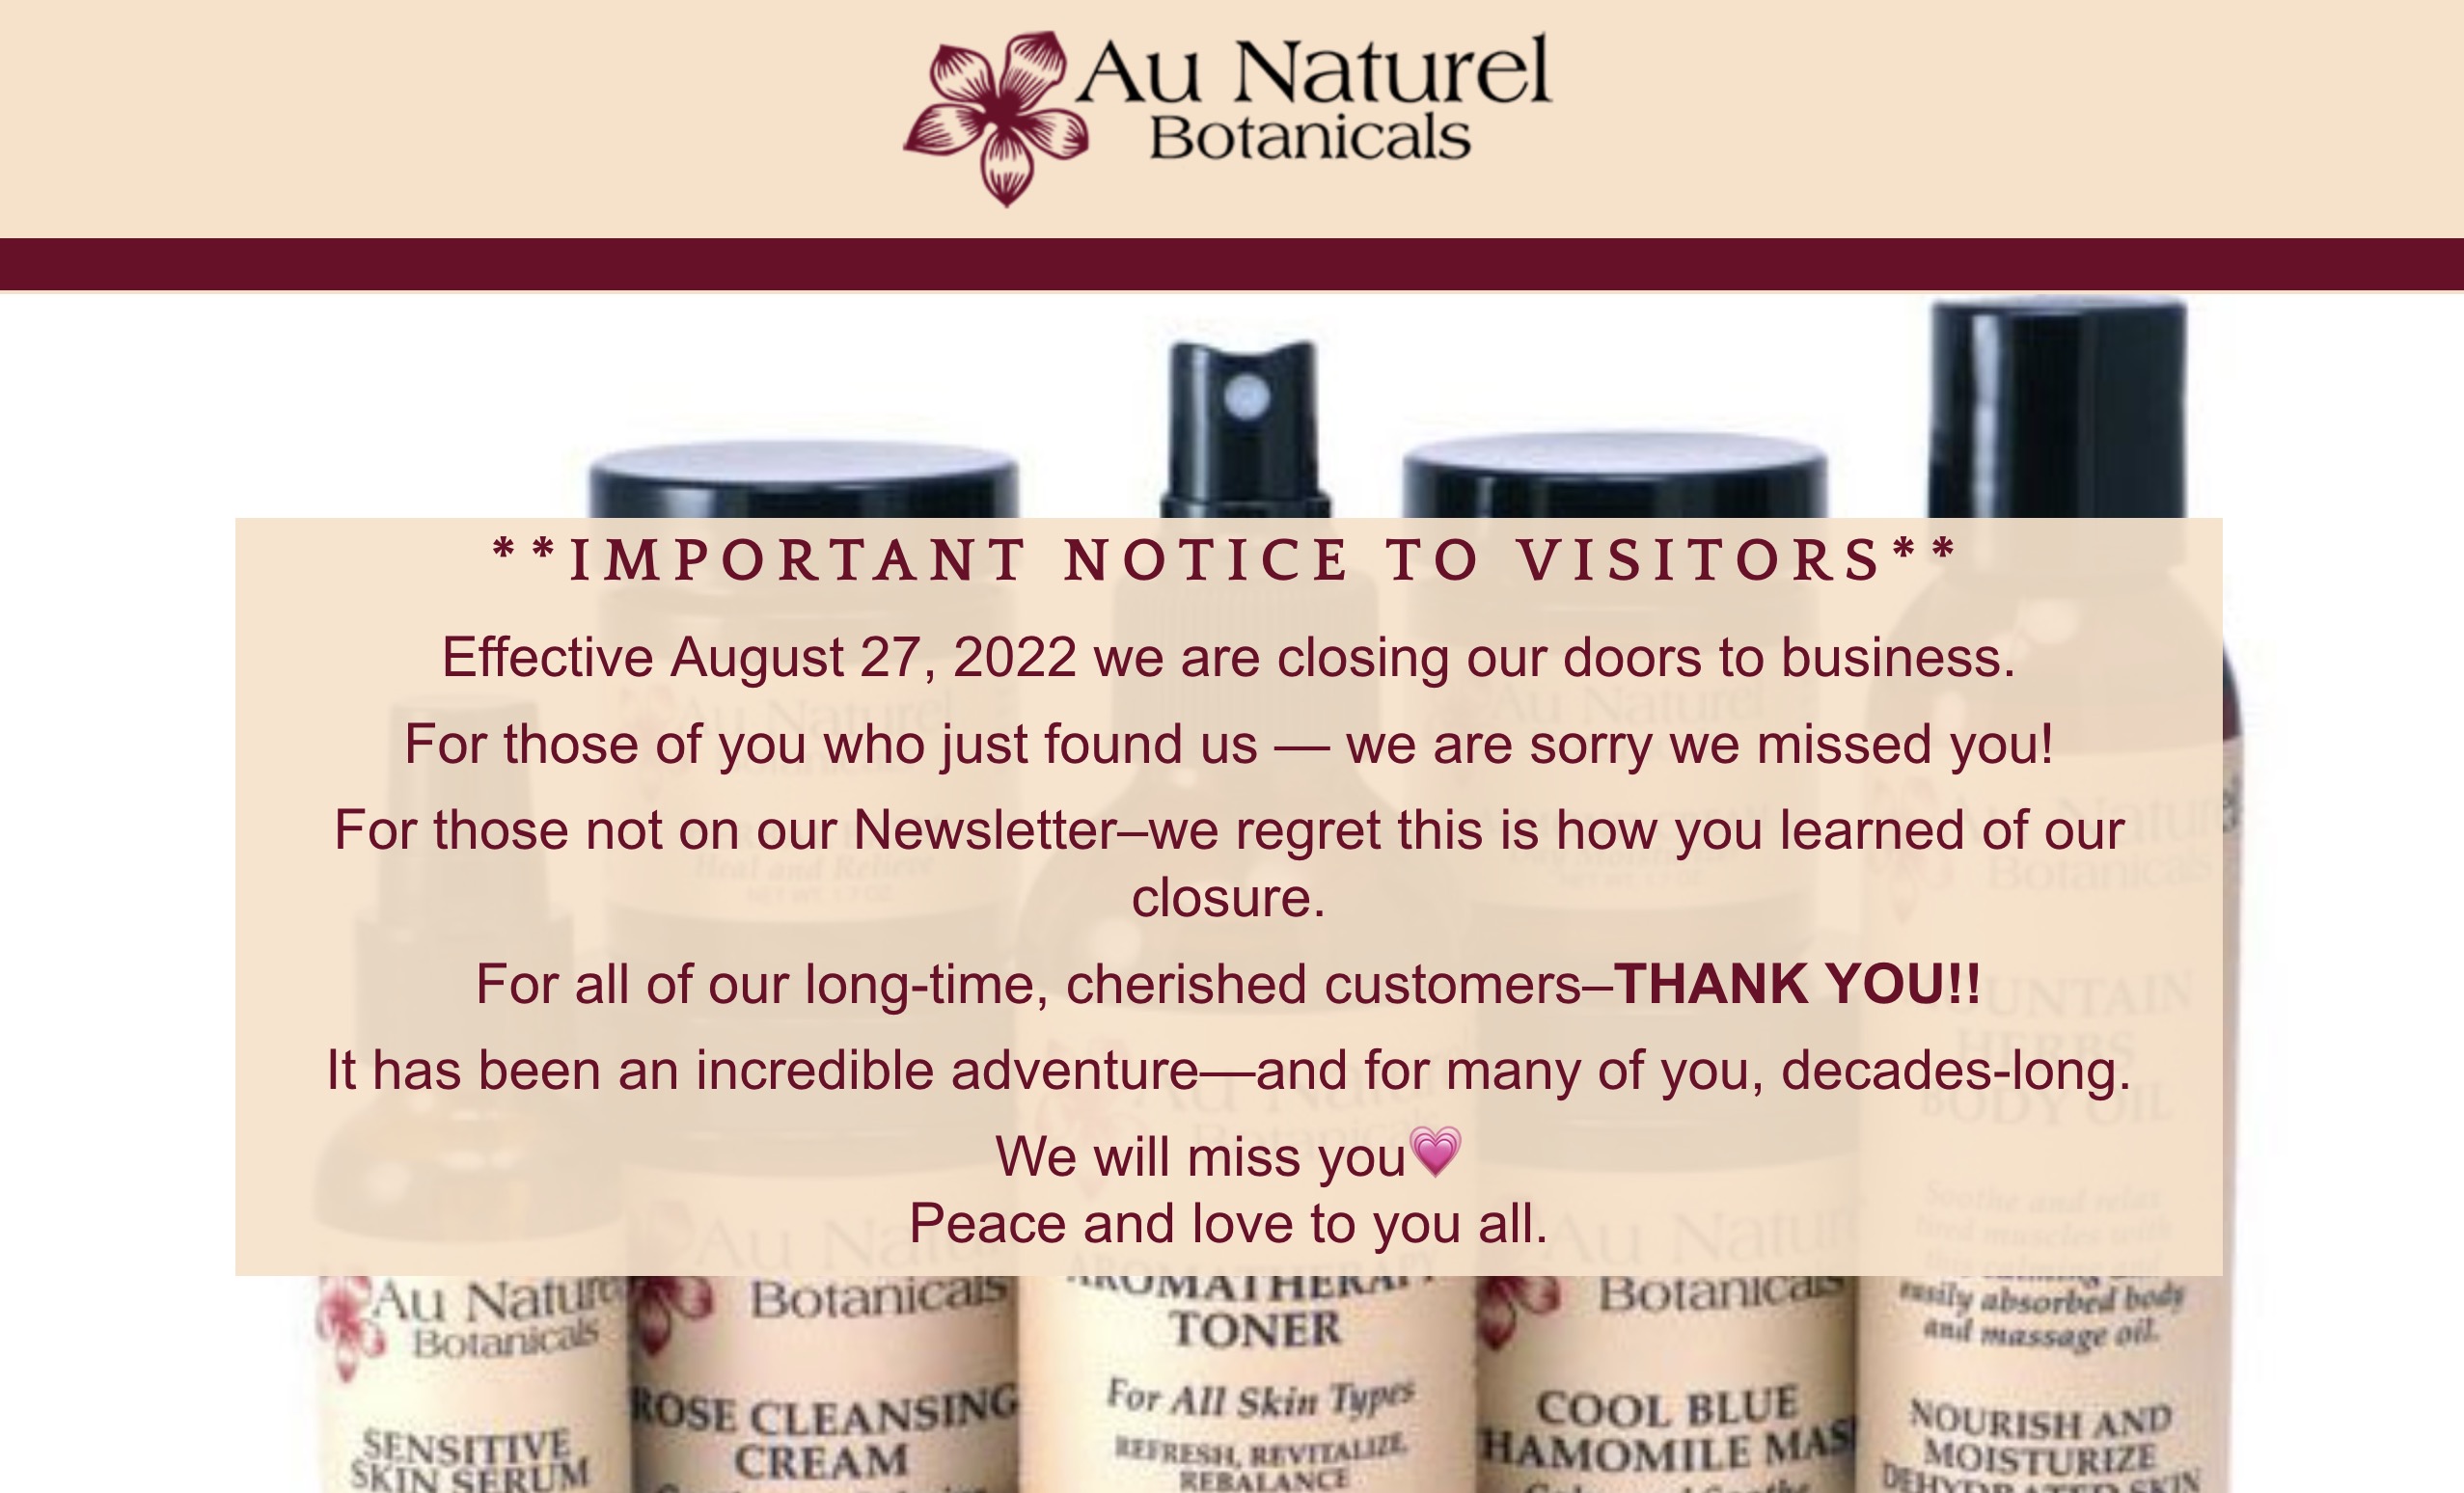 AuNatural Botanicals is now closed